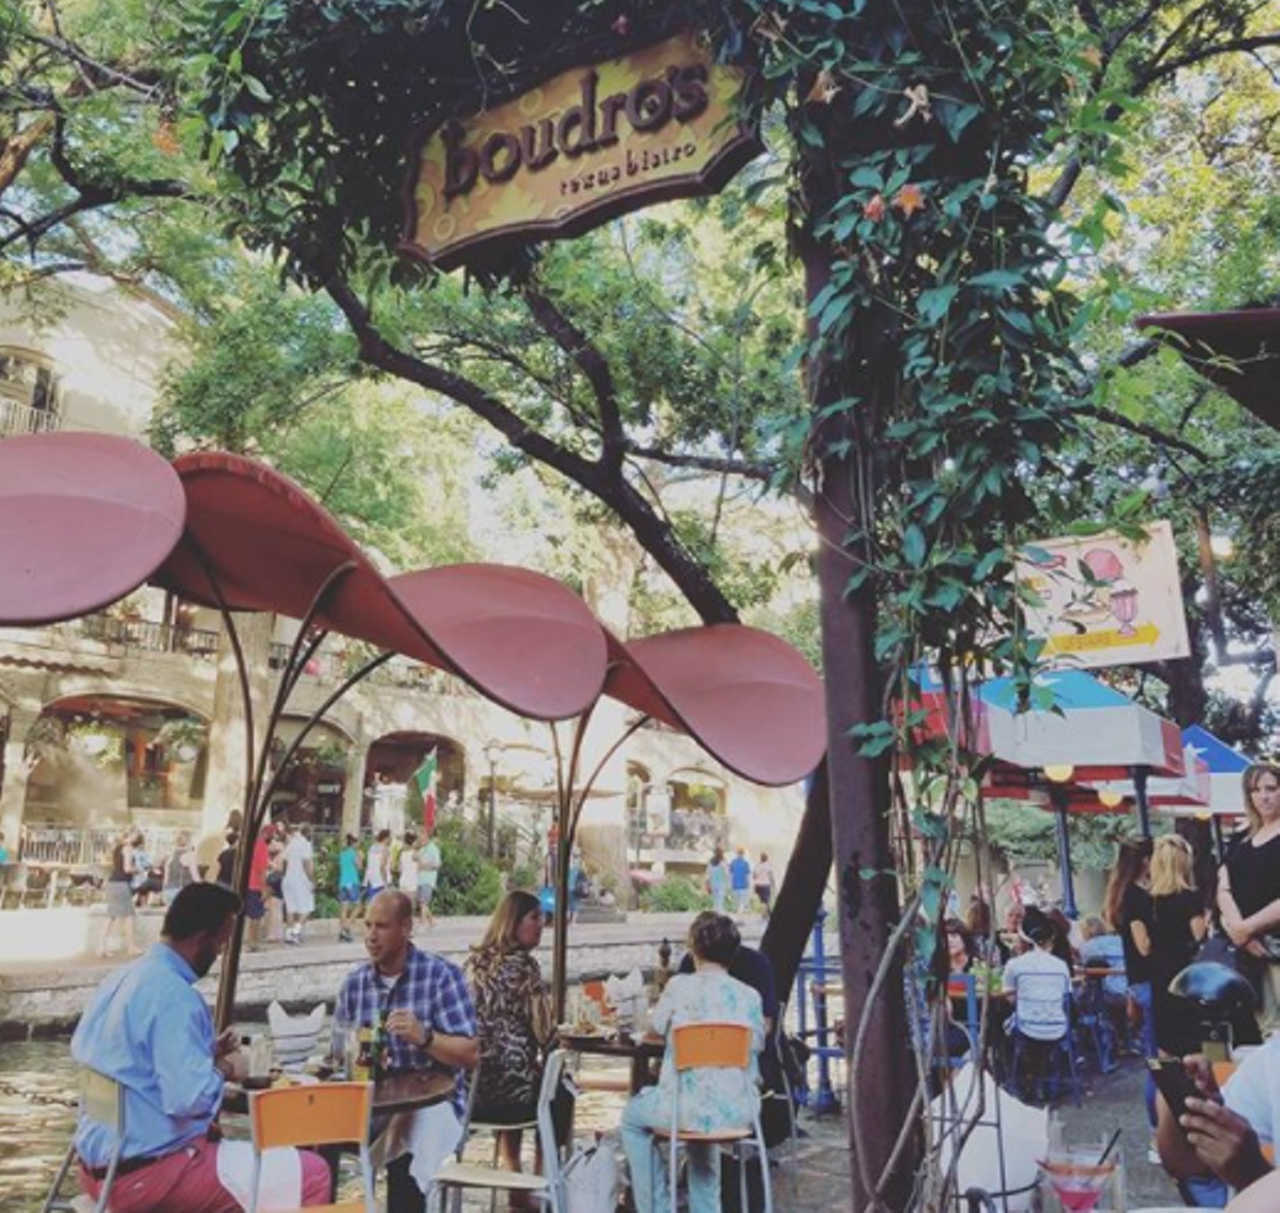 Boudro’s On the River Walk
421 E Commerce St., (210) 224-8484, boudros.com
Come for the steaks, stay for the drinks. If you order anything besides the fire-grilled Angus filet + lobster tail with a prickly pear margarita, you’ve done it all wrong.
Photo via Instagram / publicimagelimited